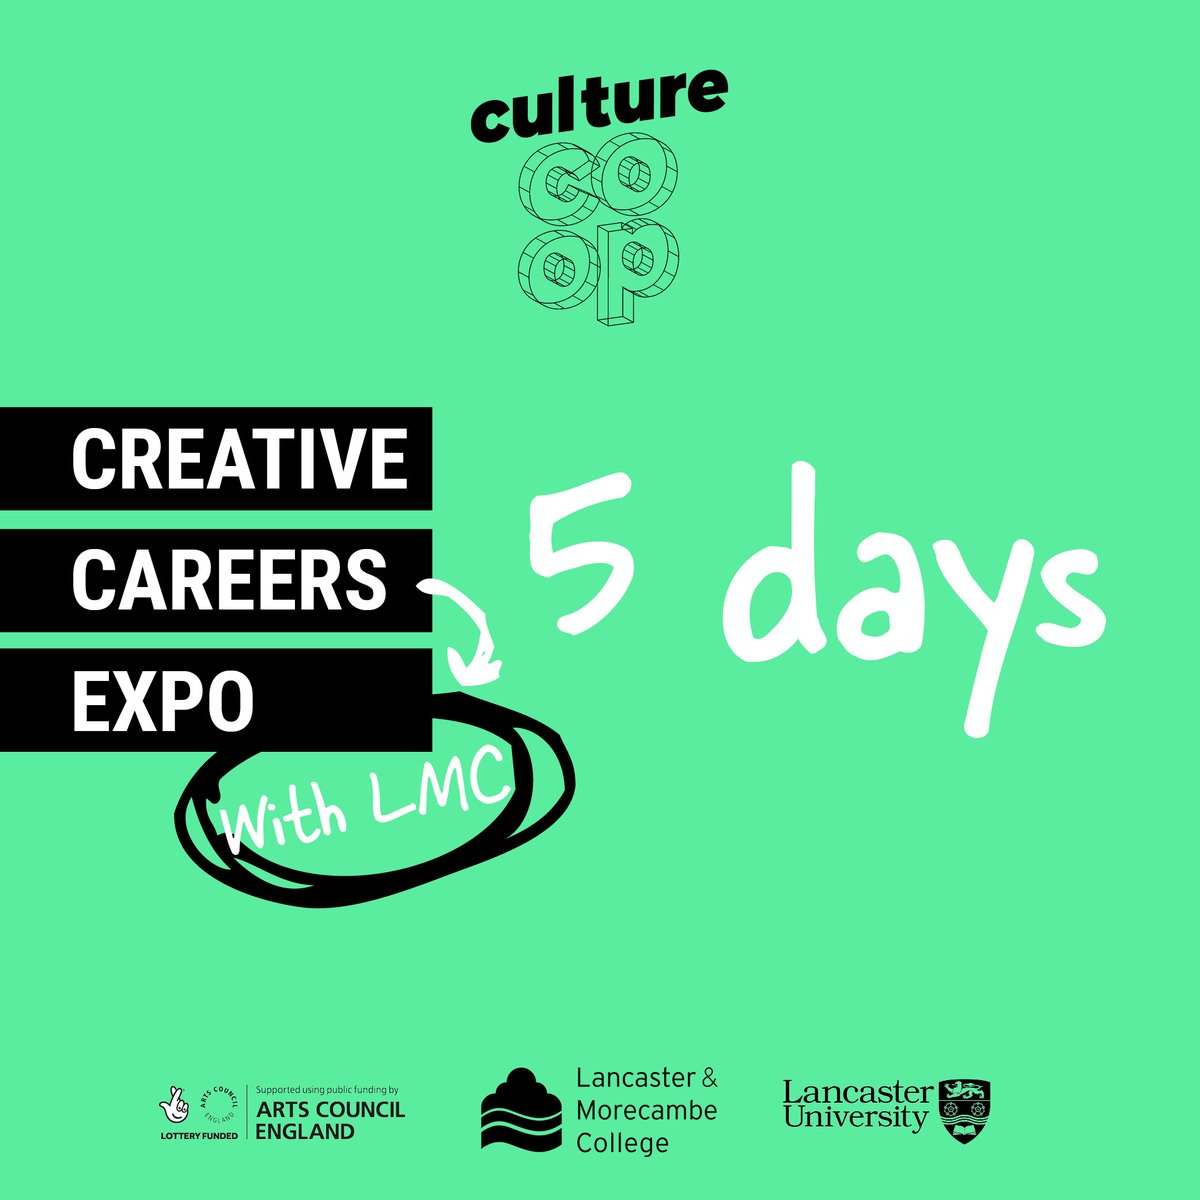 Participating local schools to include - @ripleystthomas @OurladysHt @BayLeadershipAc & Central Lancaster High School. #NCW2022 #Art #Creativity #CreativeCareers #YoungPeople #CareerEXPO